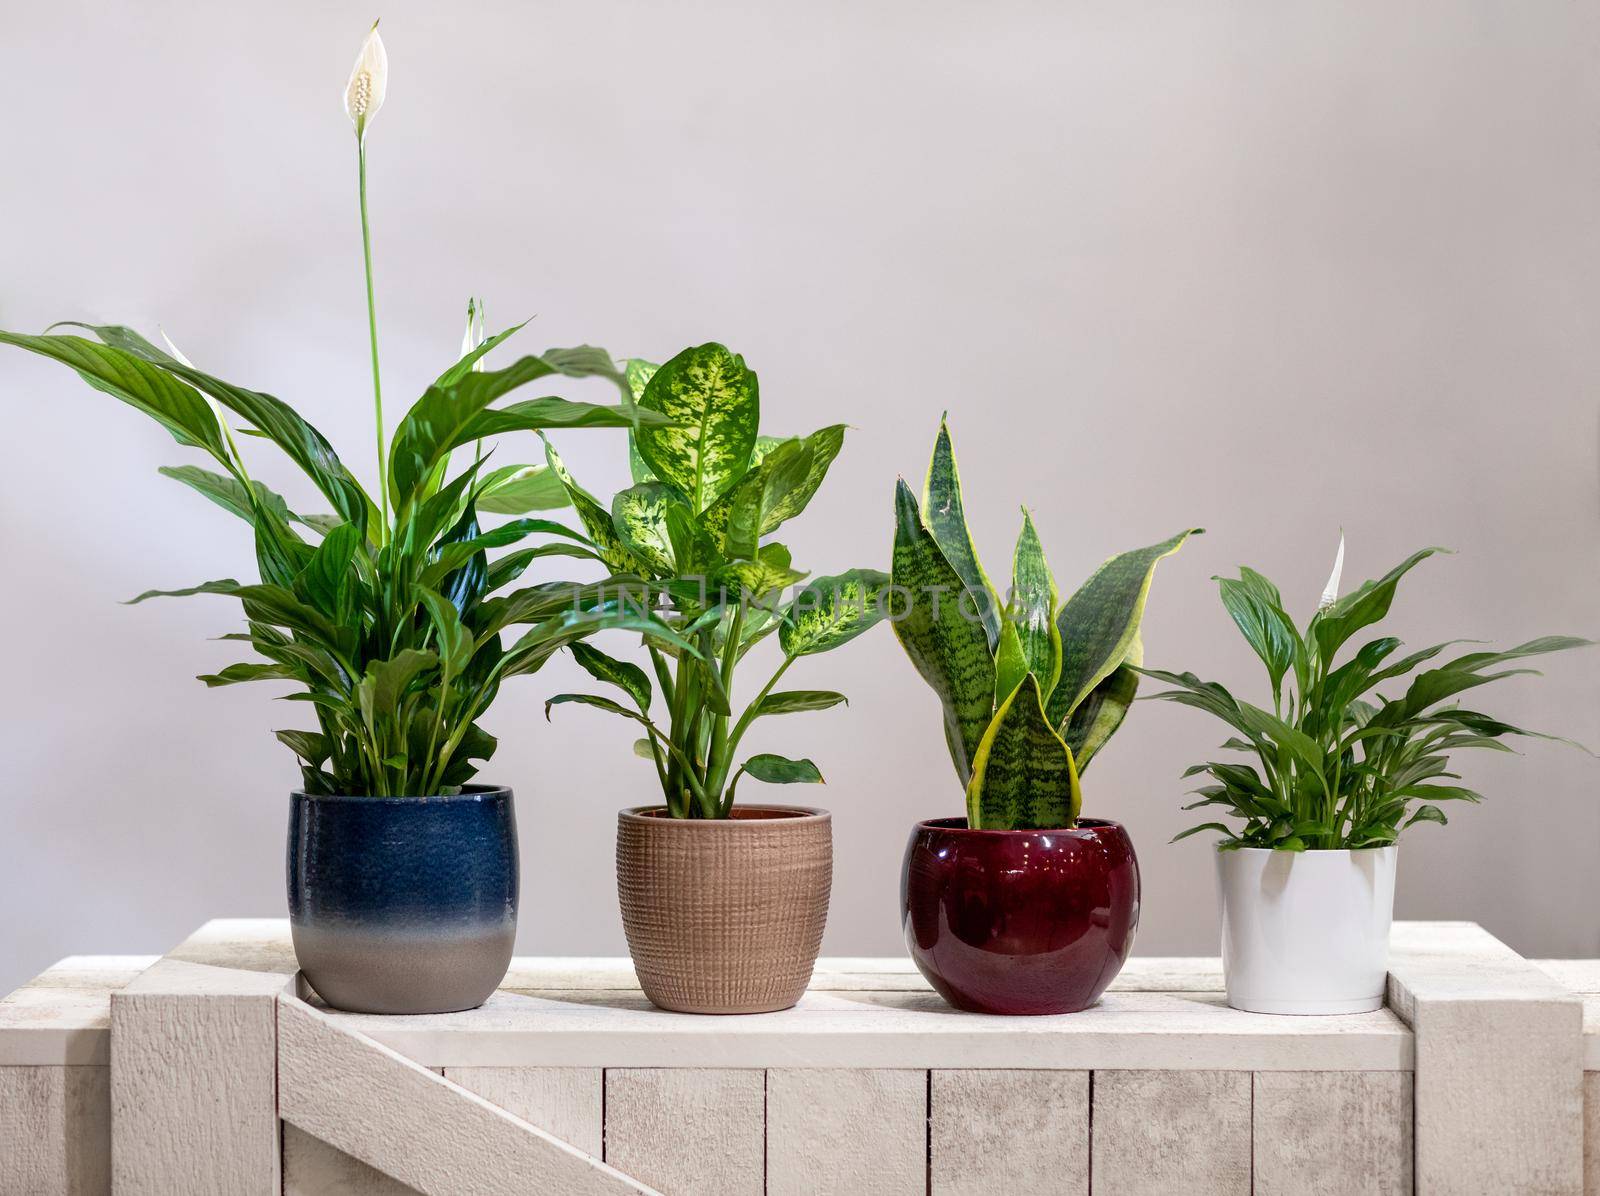 Peace Lily, Dieffenbachia Dumb canes, Mother-in-law's Tongue Viper's bowstring hemp snake plant by ferhad